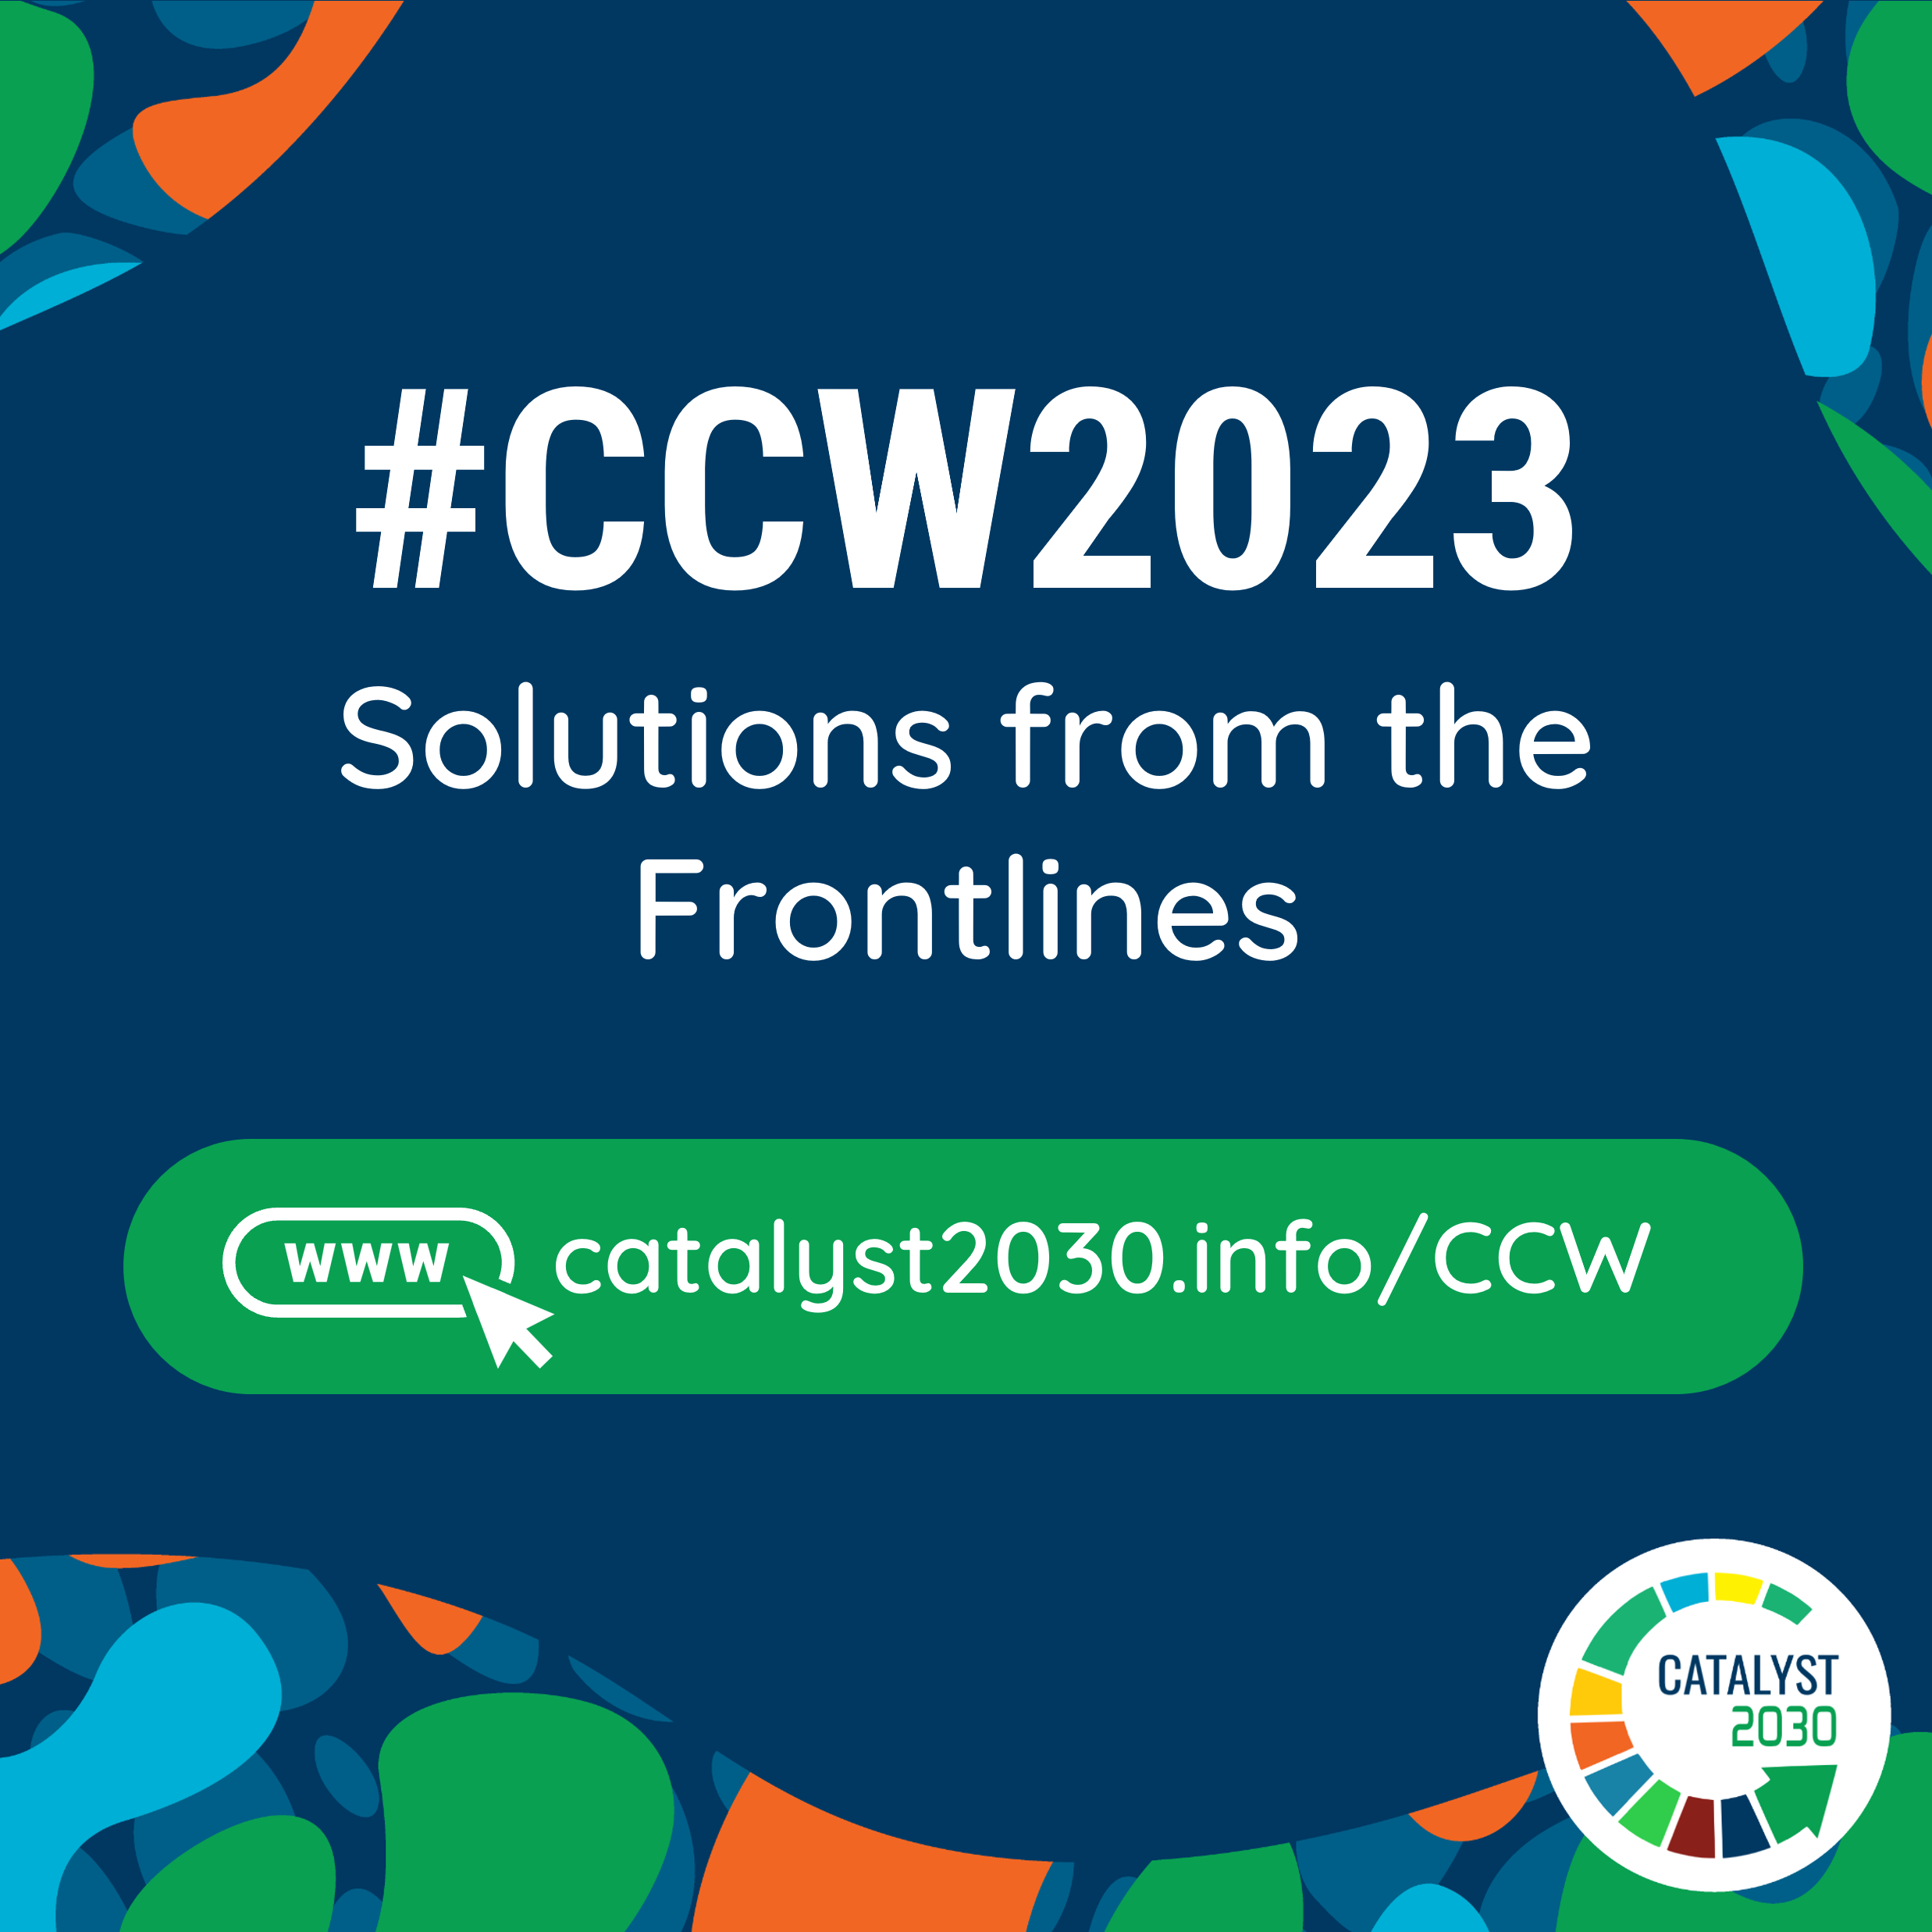 CCW 2023 theme is Solutions from the Frontlines